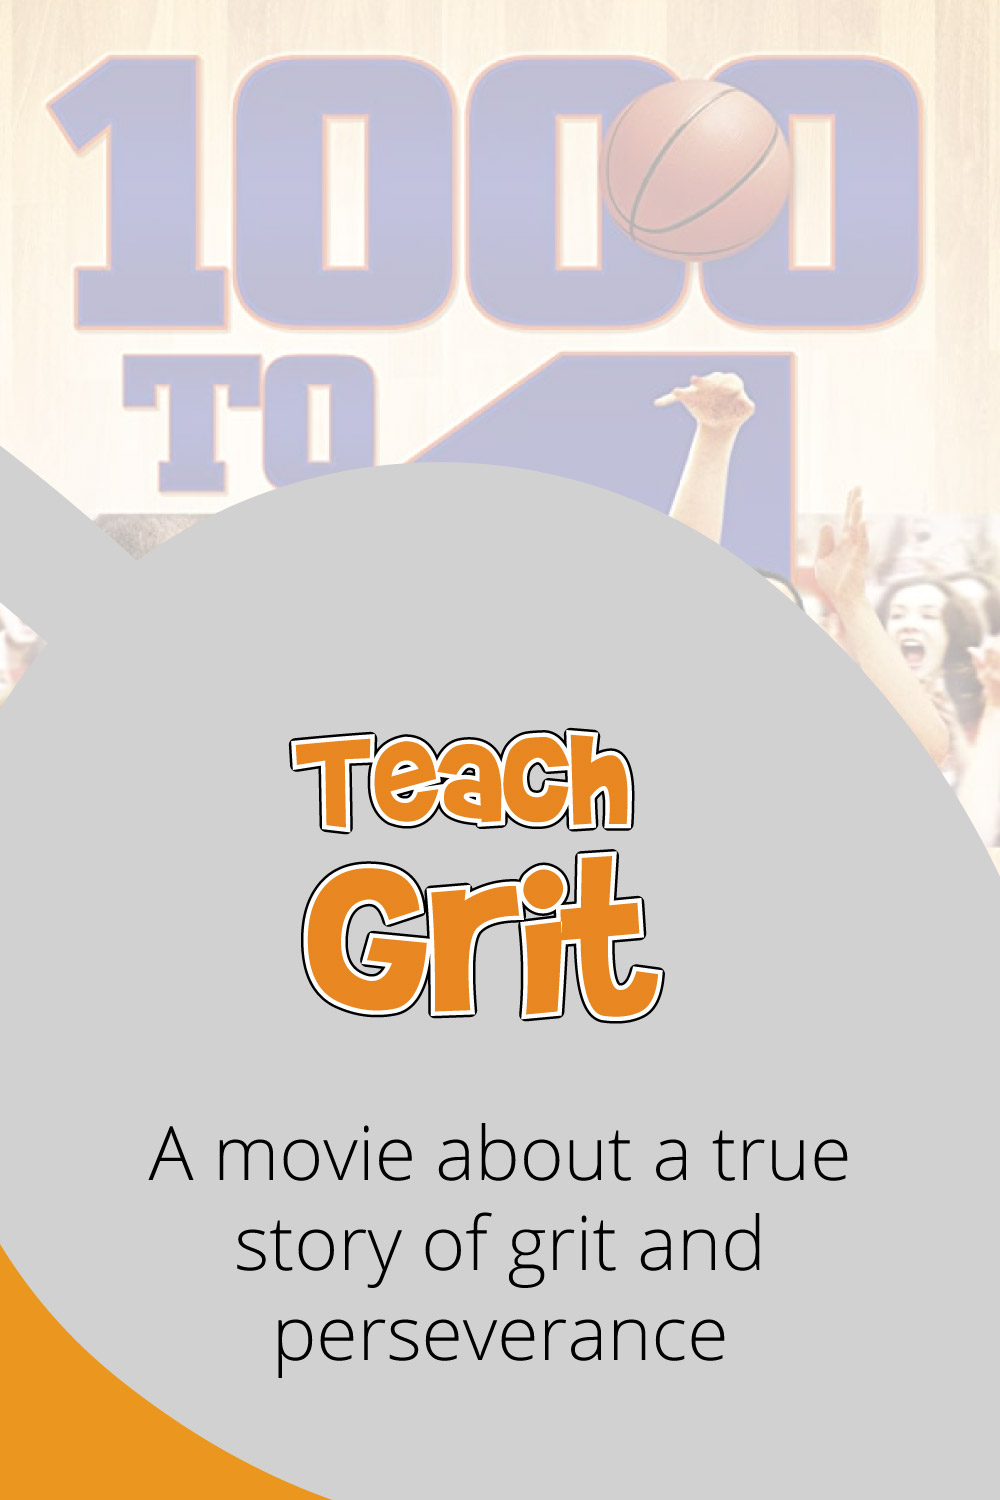 Movie that teaches about grit and perseverance